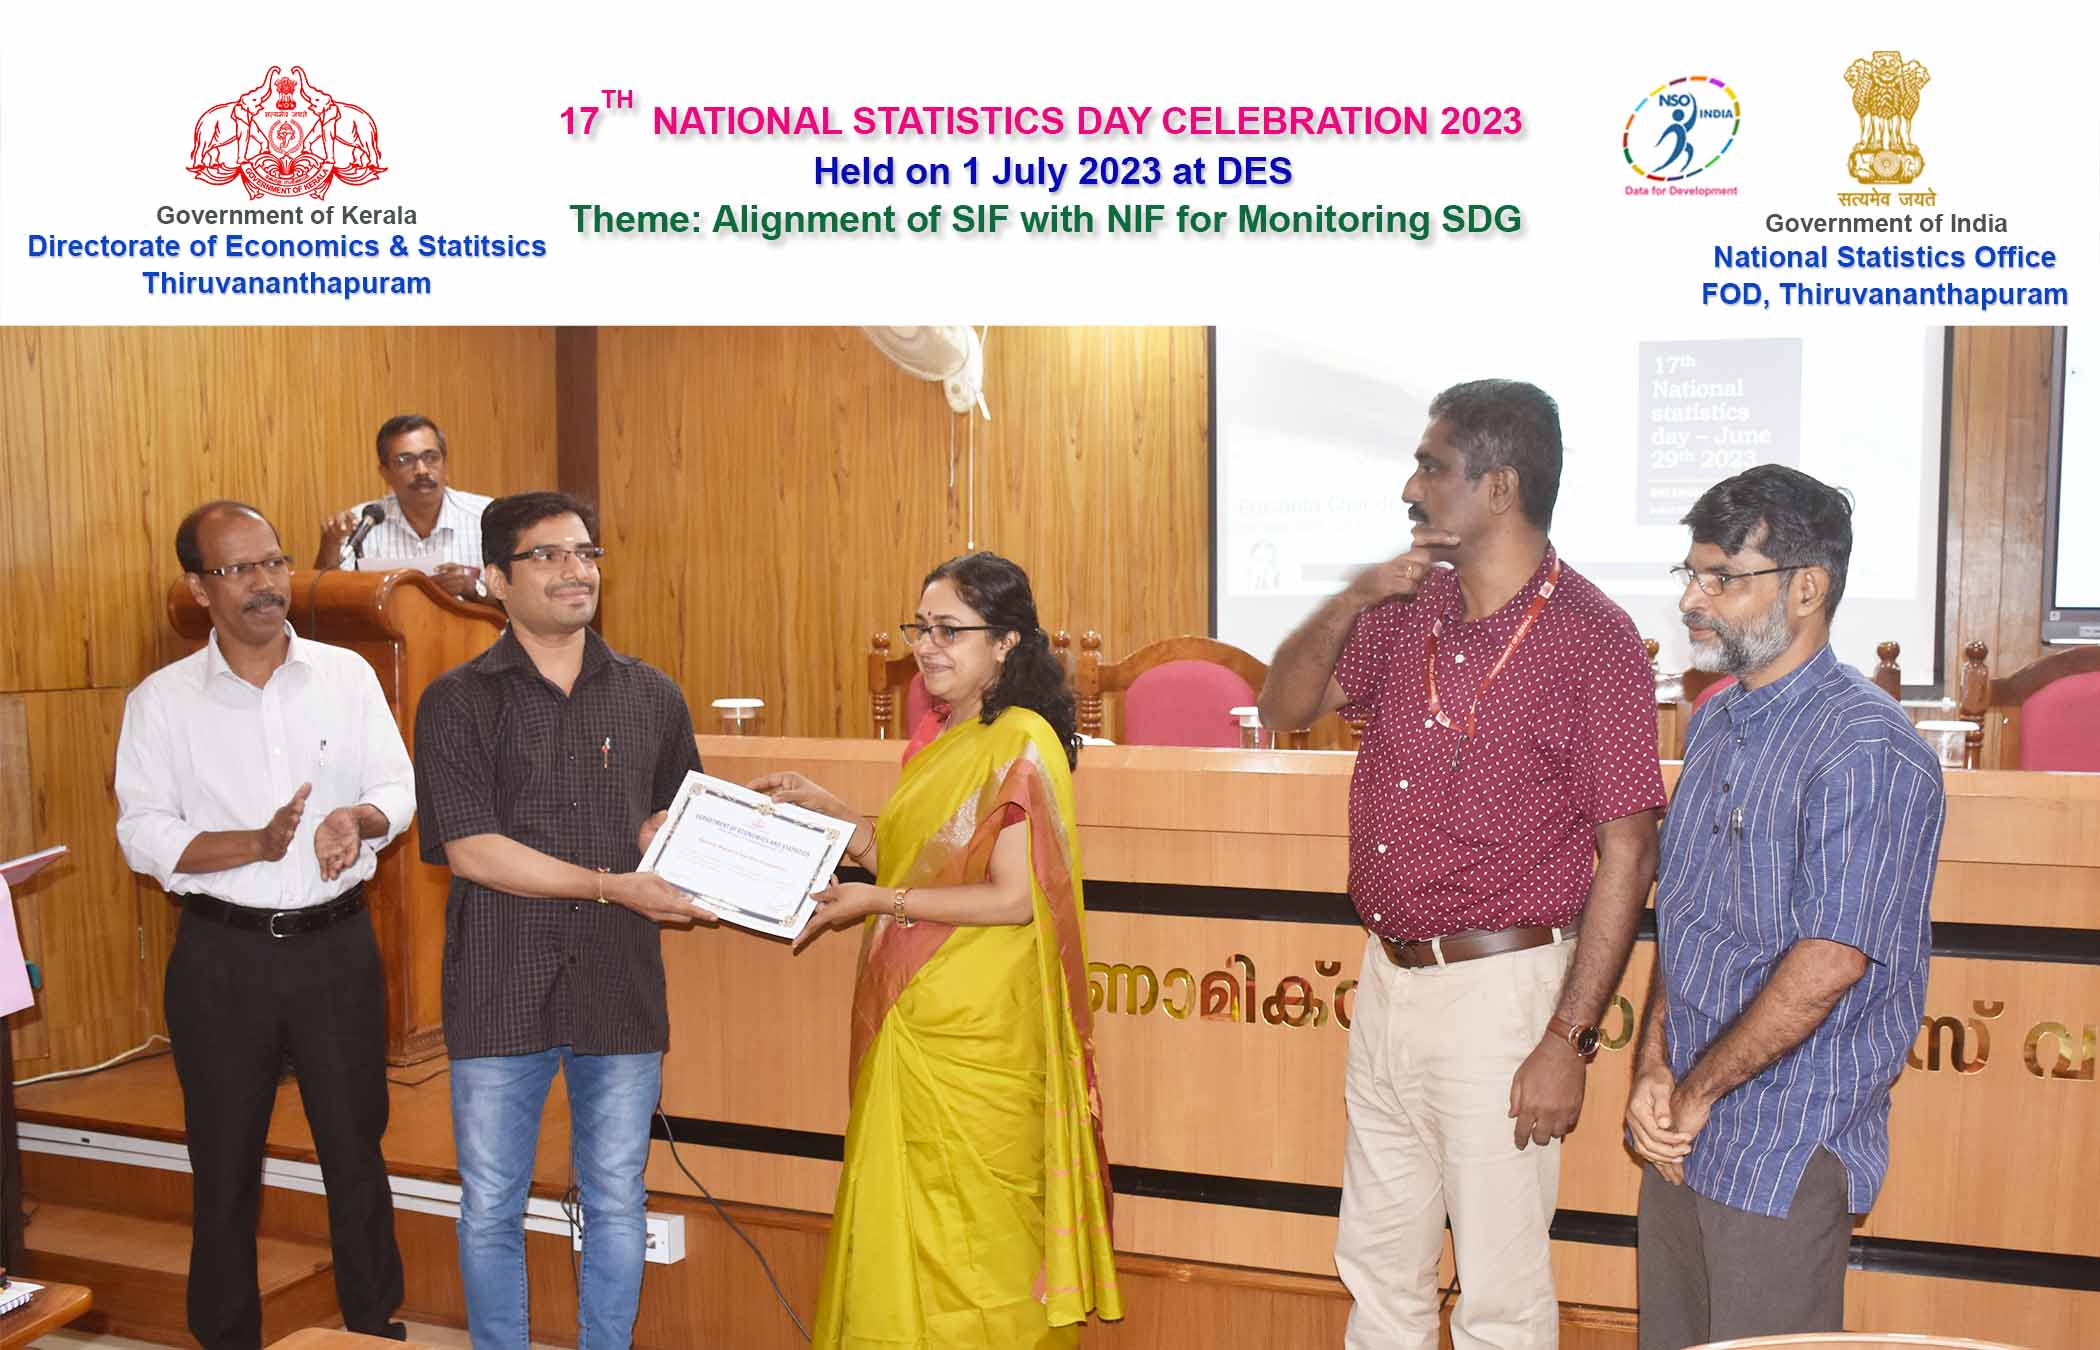 Sri. Sijith K S Research Officer receving certificate for the second prize in Quiz Competition